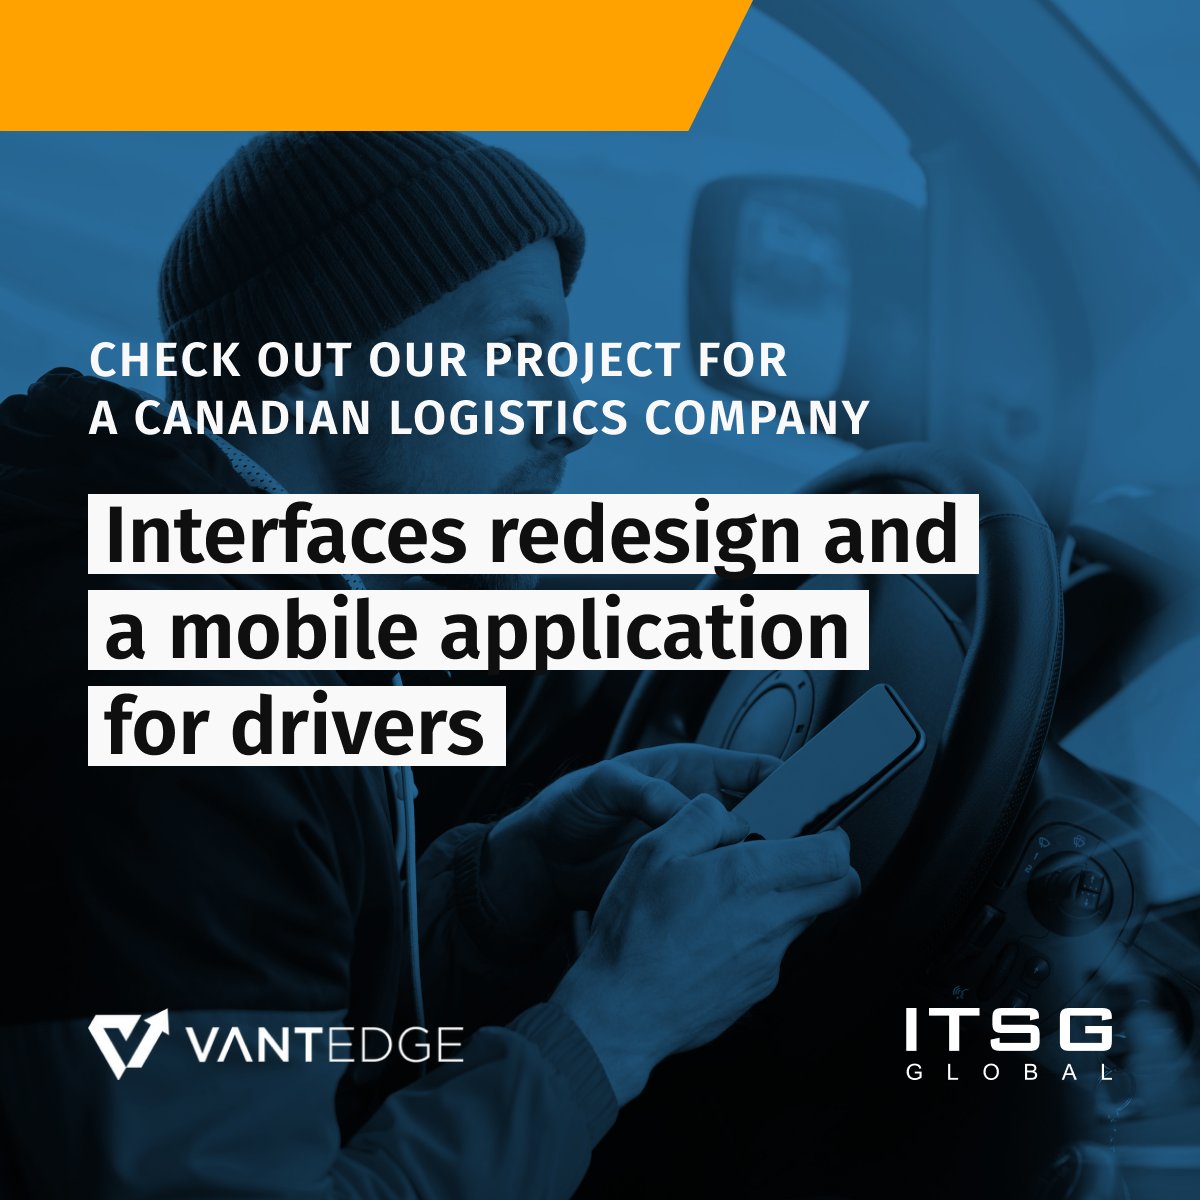 We know our work makes sense when we carry out projects like the one for VantEdge Logistics Inc.💪 Check this out and feel free to contact us for assistance in elevating your business: itsg-global.com/portfolio/vant… 👈 #logistics #itsg #vantedgelgx #mobileapp #trucking #business